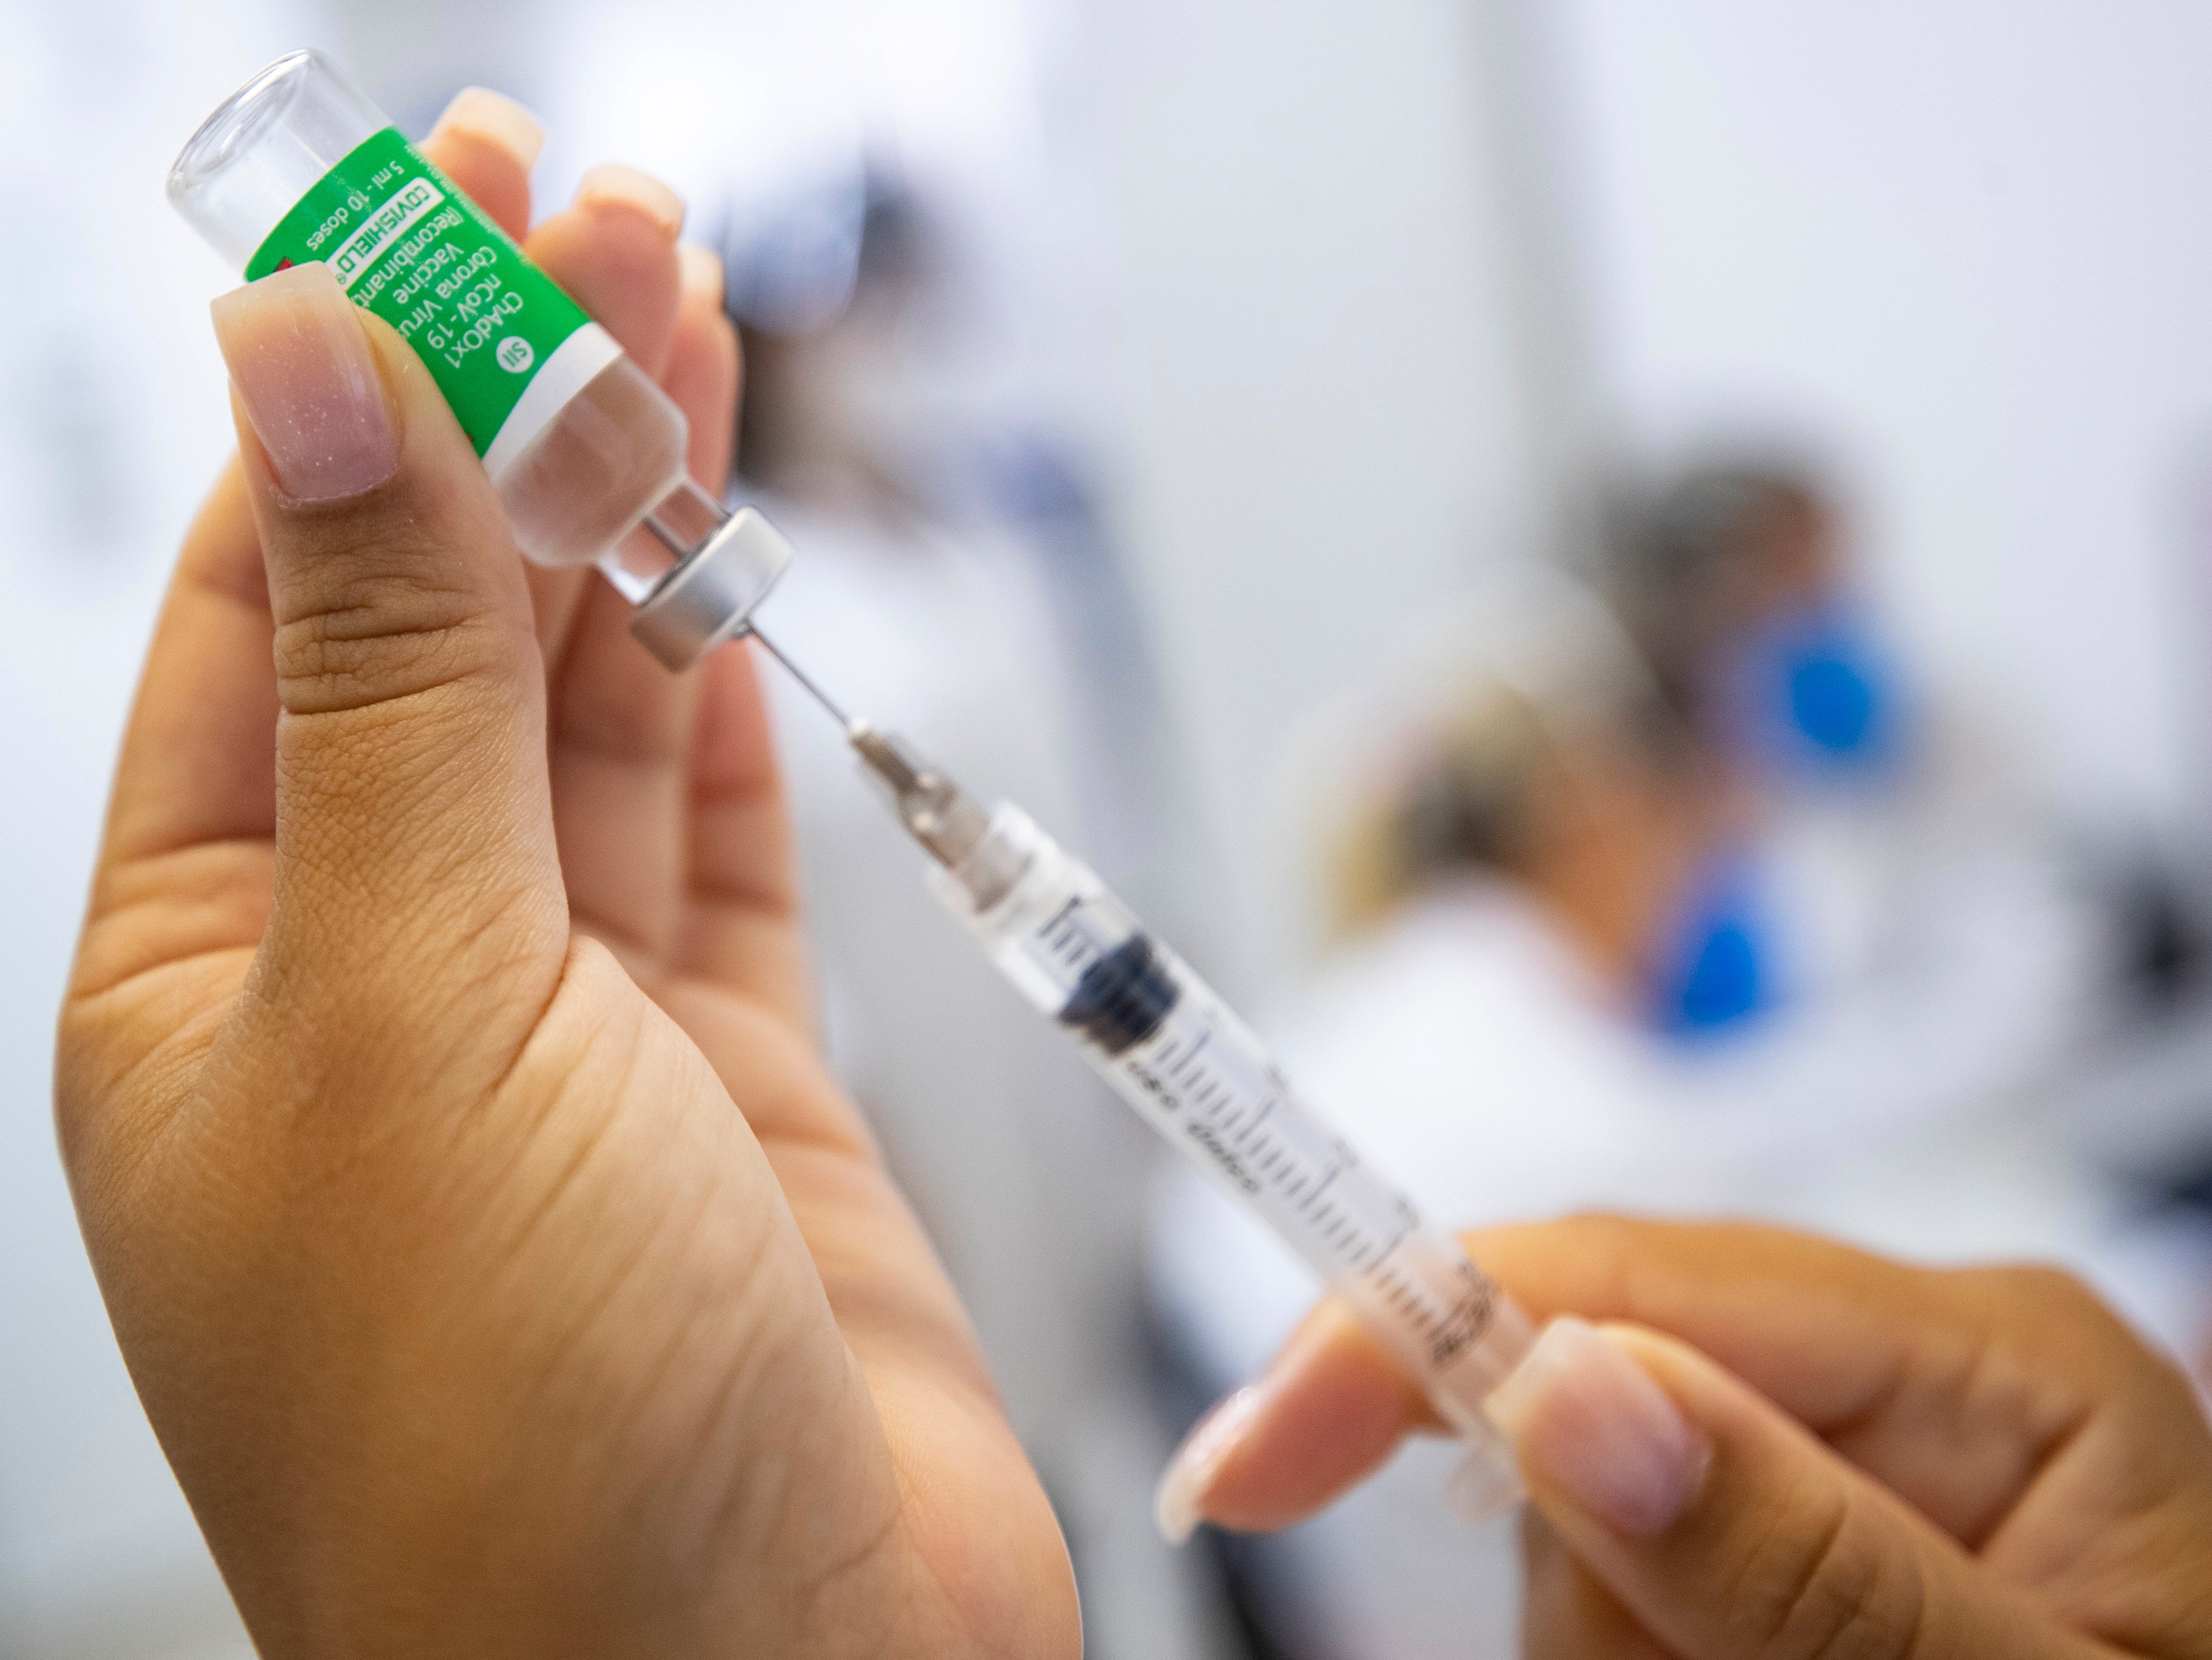 NHS bosses are concerned at the lower uptake of the Covid vaccines among black and minority ethnic staff